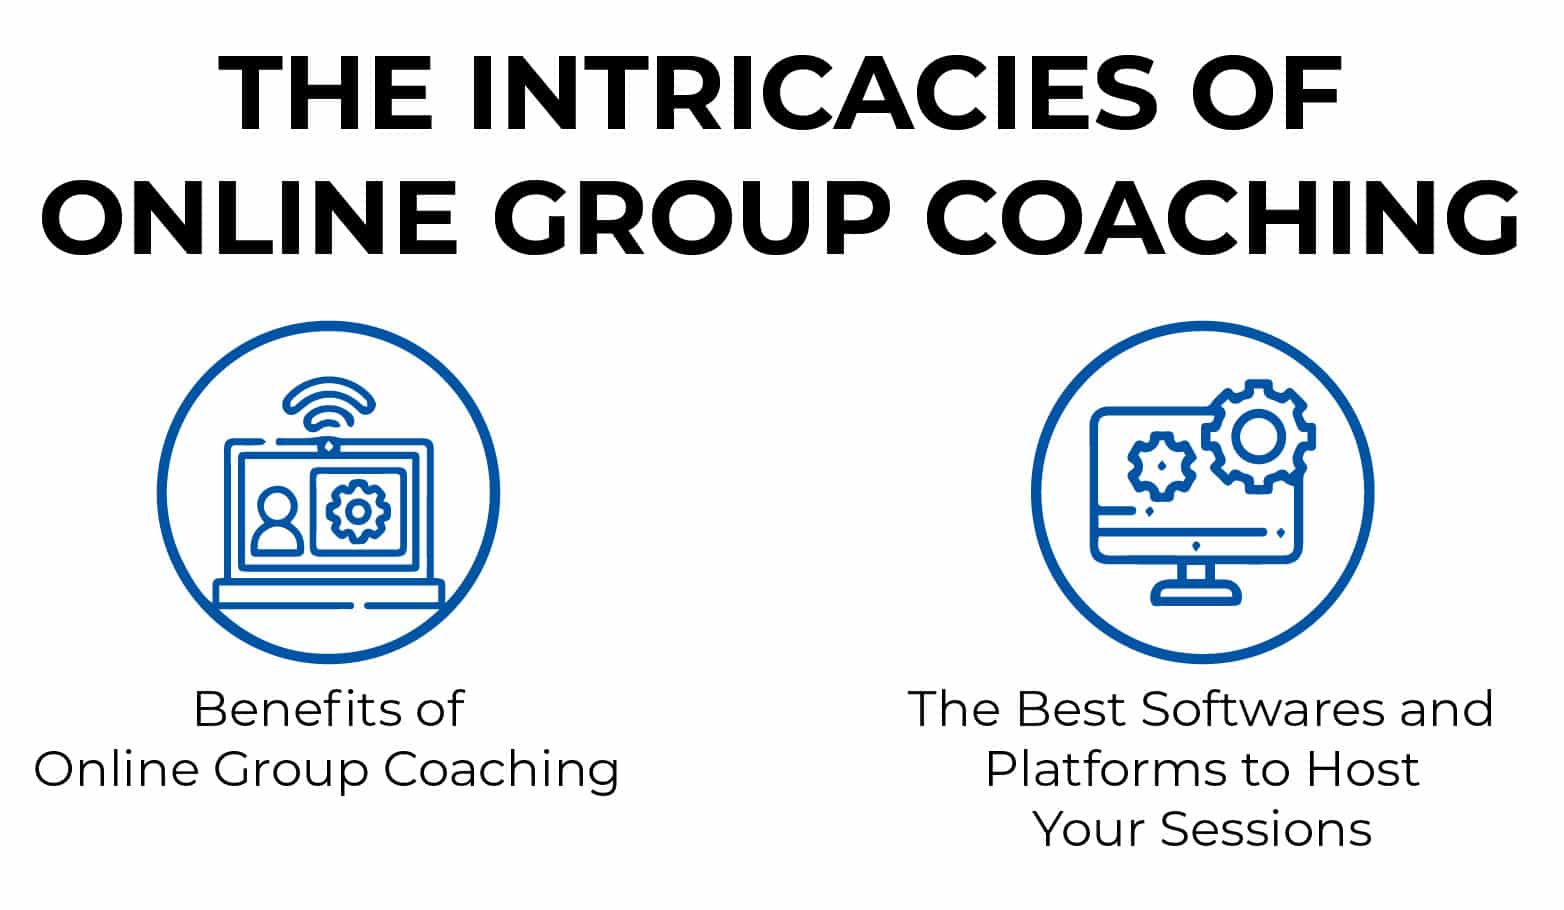 THE INTRICACIES OF ONLINE GROUP COACHING